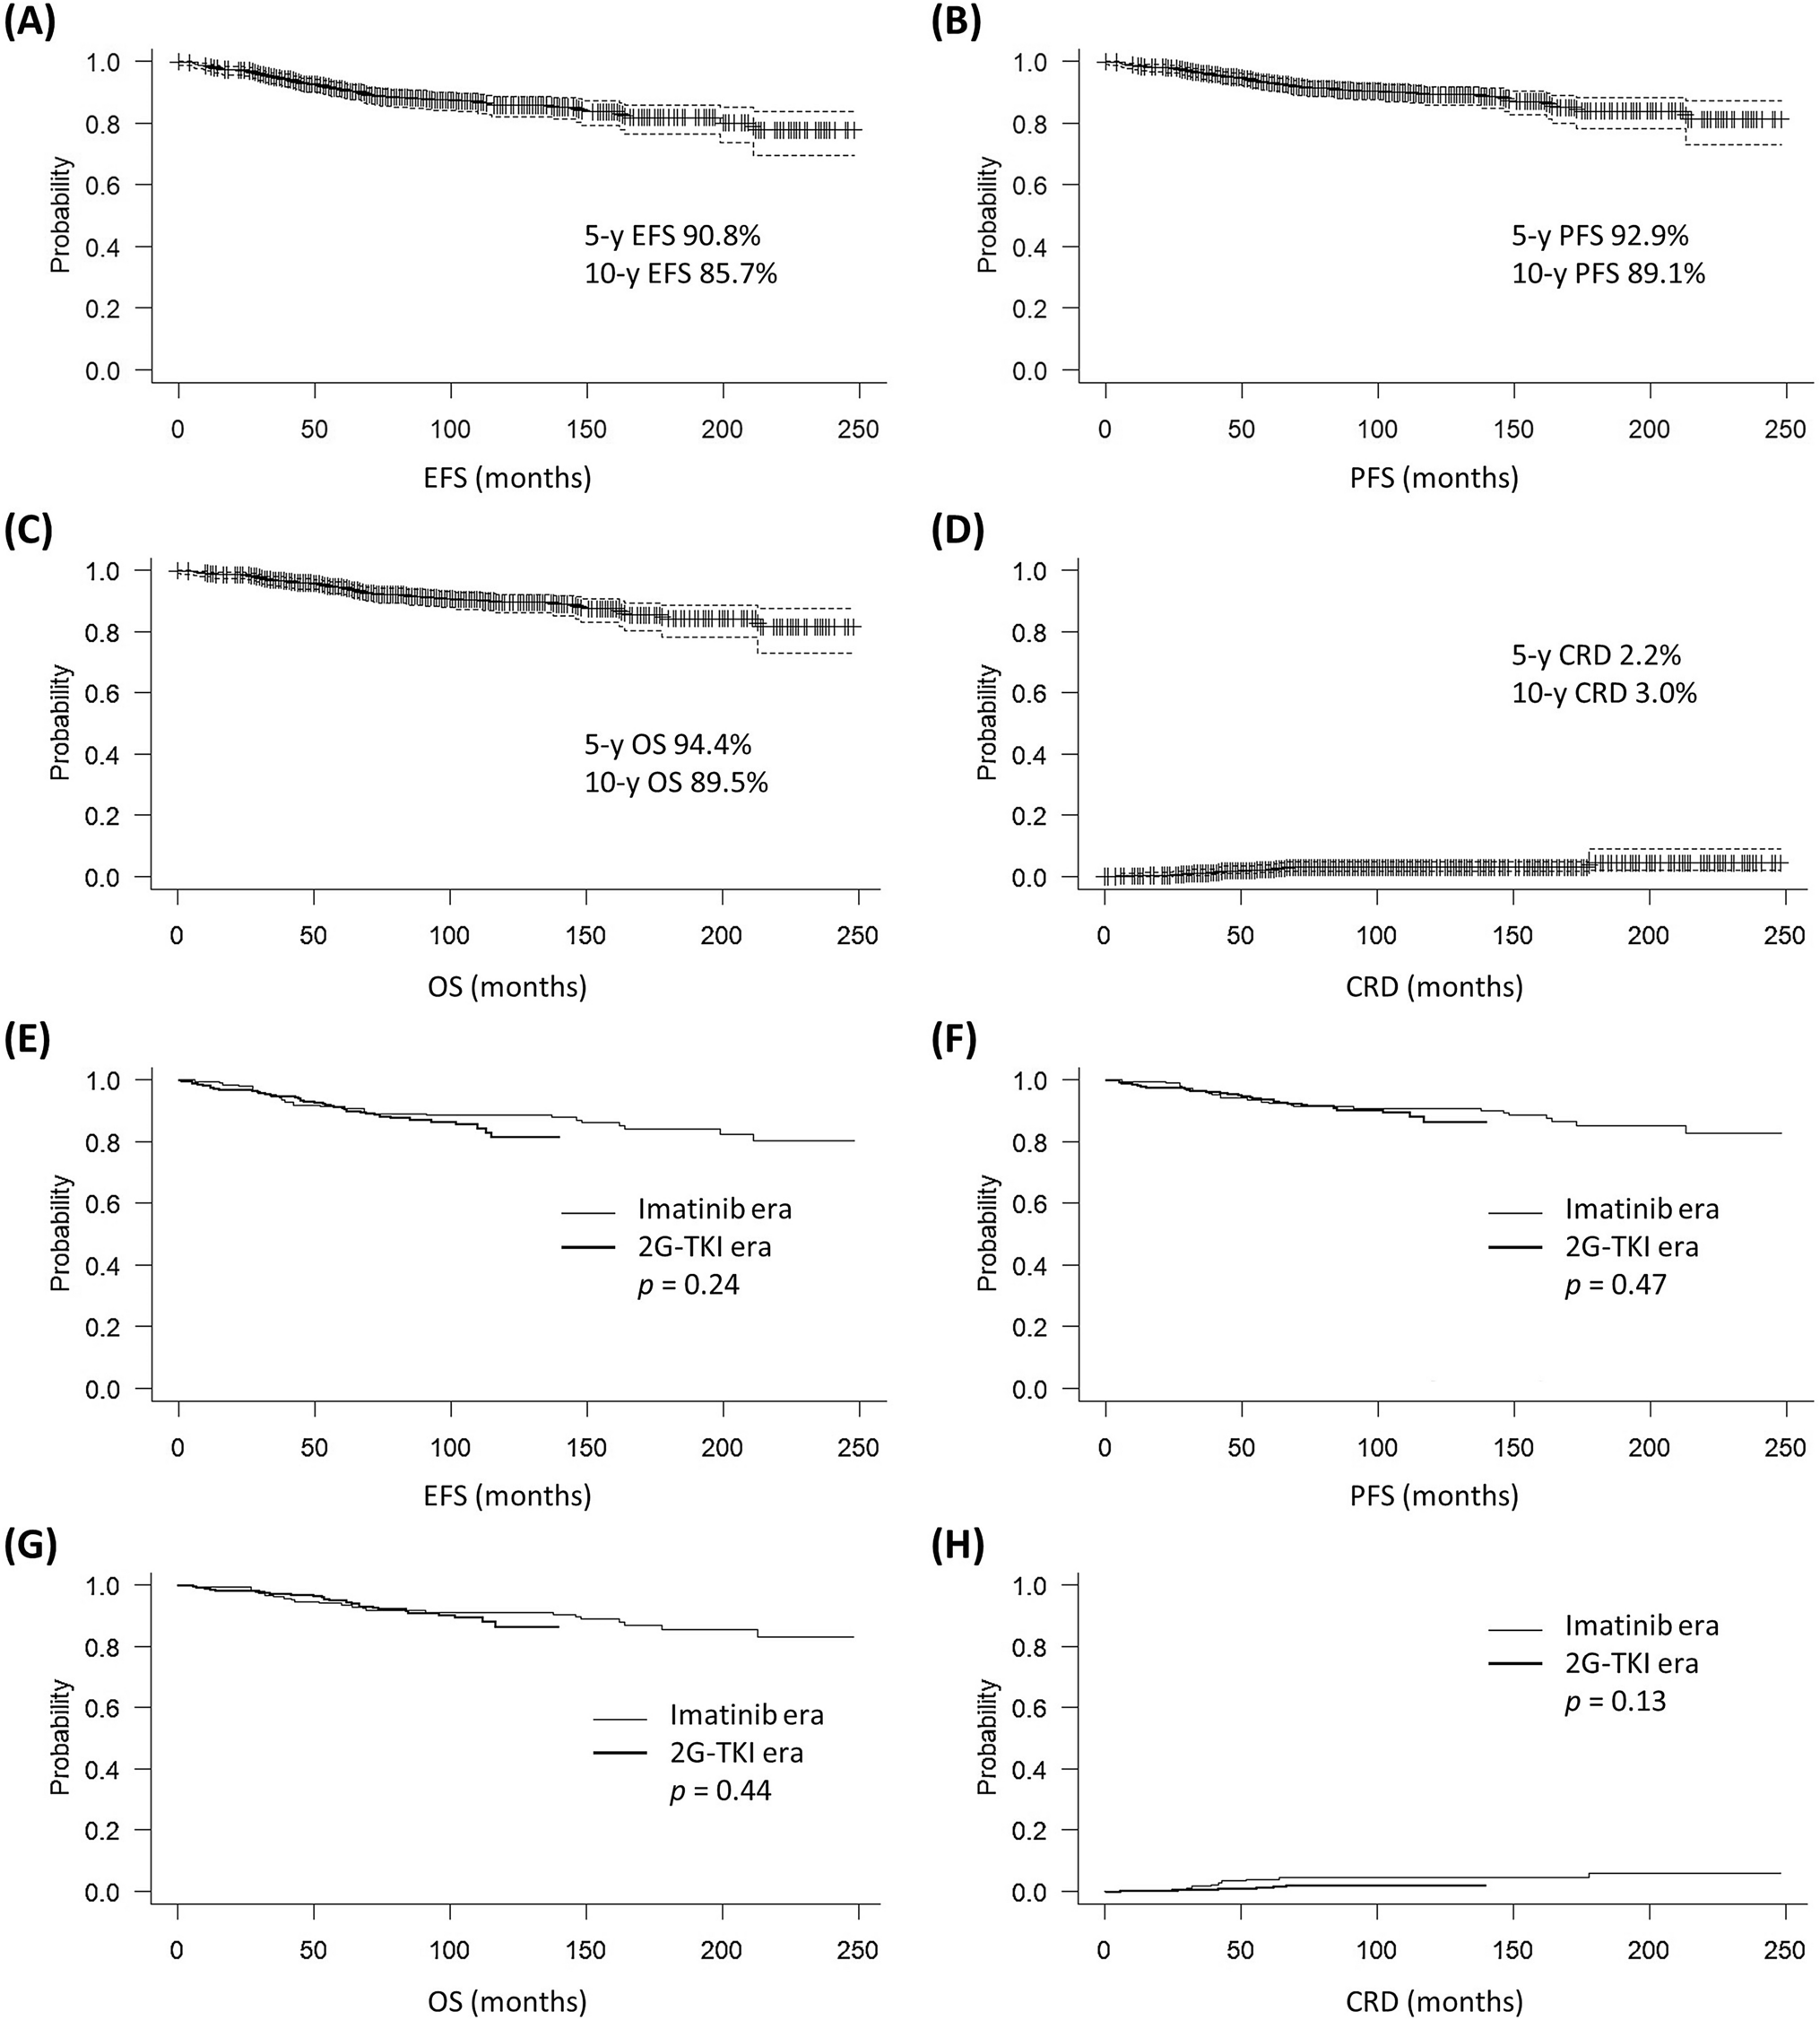 Changes in chronic myeloid leukemia treatment modalities and outcomes after introduction of second-generation tyrosine kinase inhibitors as first-line therapy: a multi-institutional retrospective study by the CML Cooperative Study Group